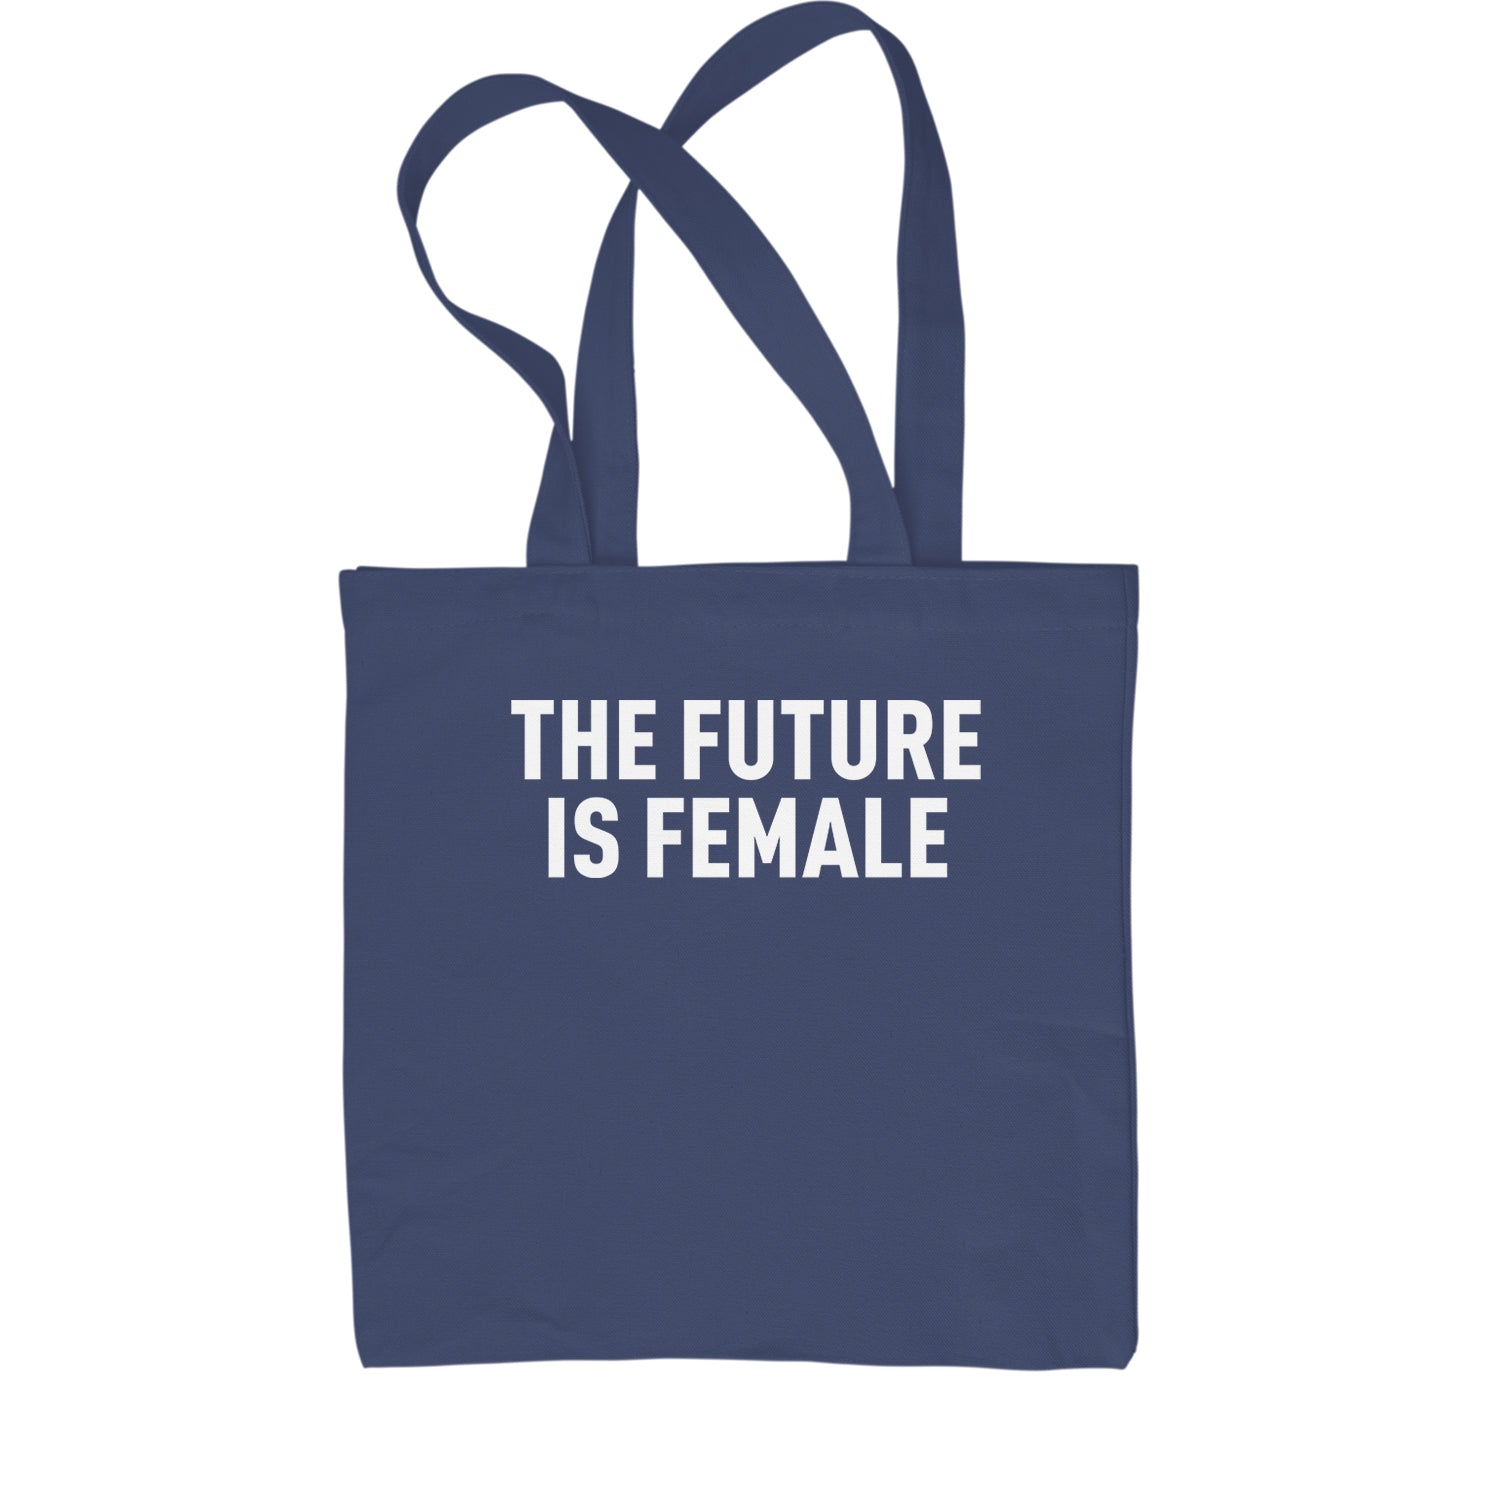 The Future Is Female Feminism Shopping Tote Bag female, feminism, feminist, femme, future, is, liberation, suffrage, the by Expression Tees